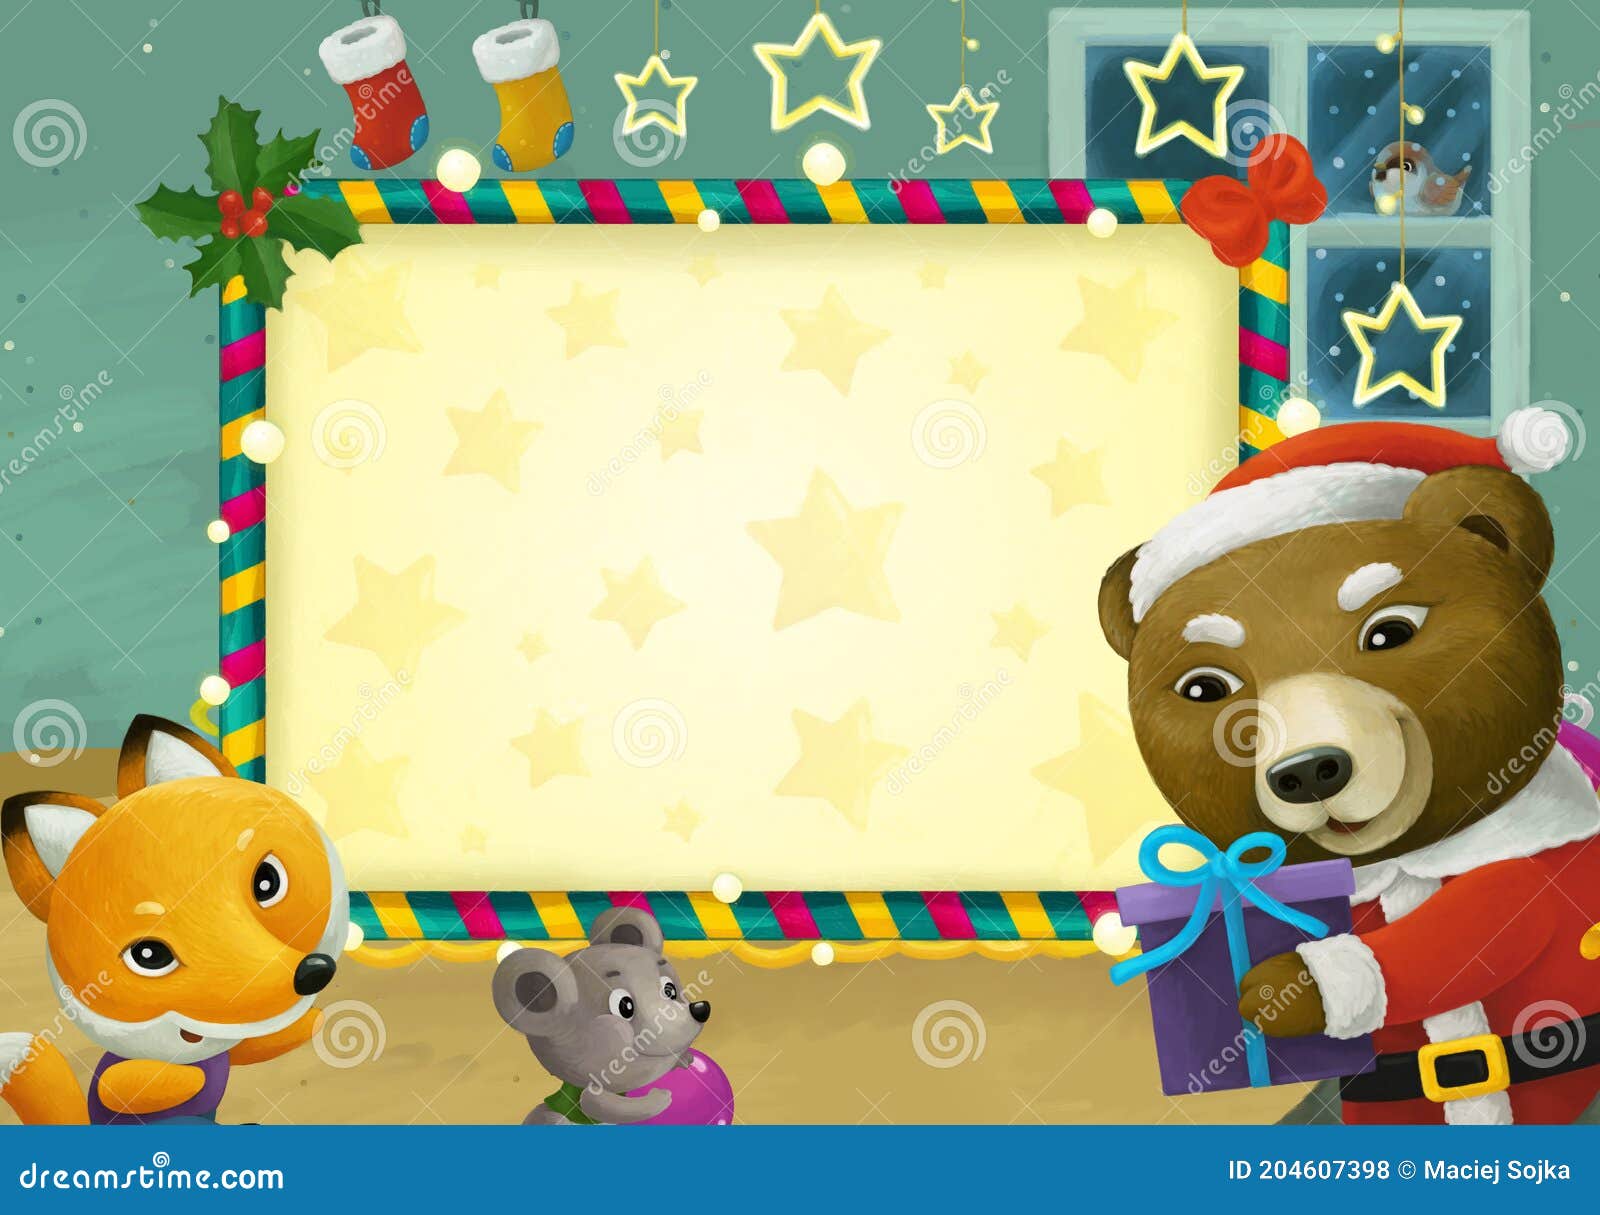 Cartoon Scene with Christmas Room and Frame Illustration Stock ...